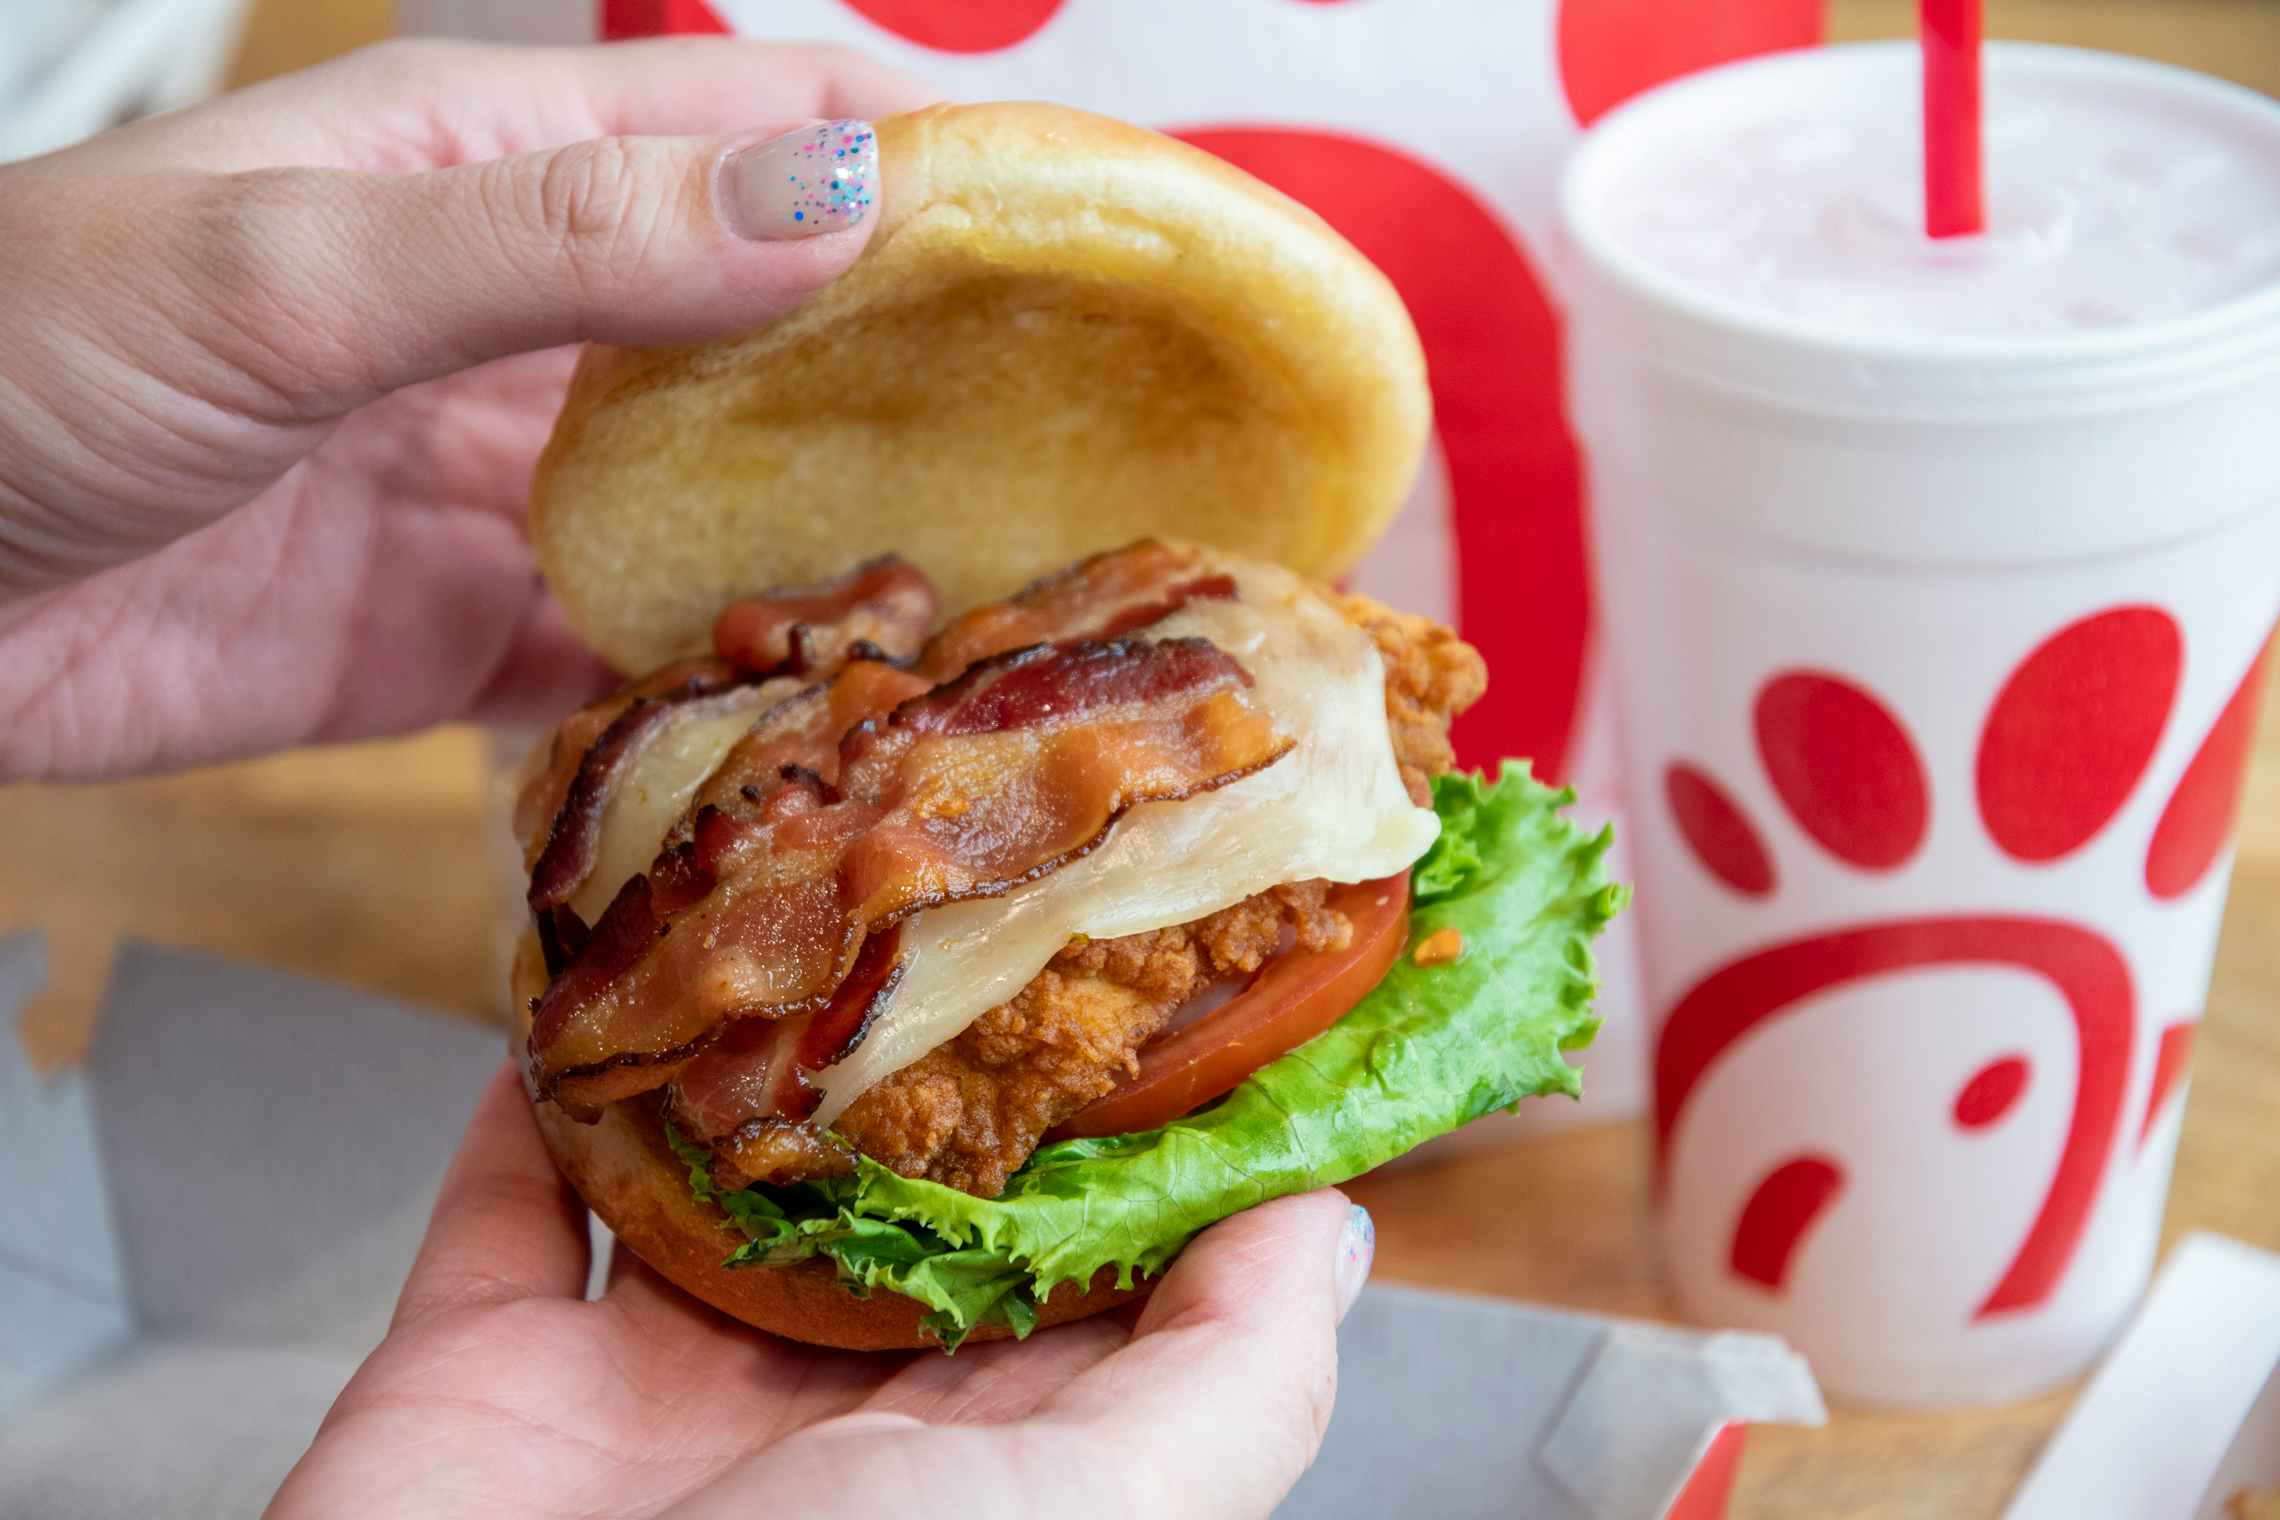 A person's hands lifting the top bun off of a Chick-fil-A chicken sandwich with bacon to show the ingredients. On the table in the backgr...